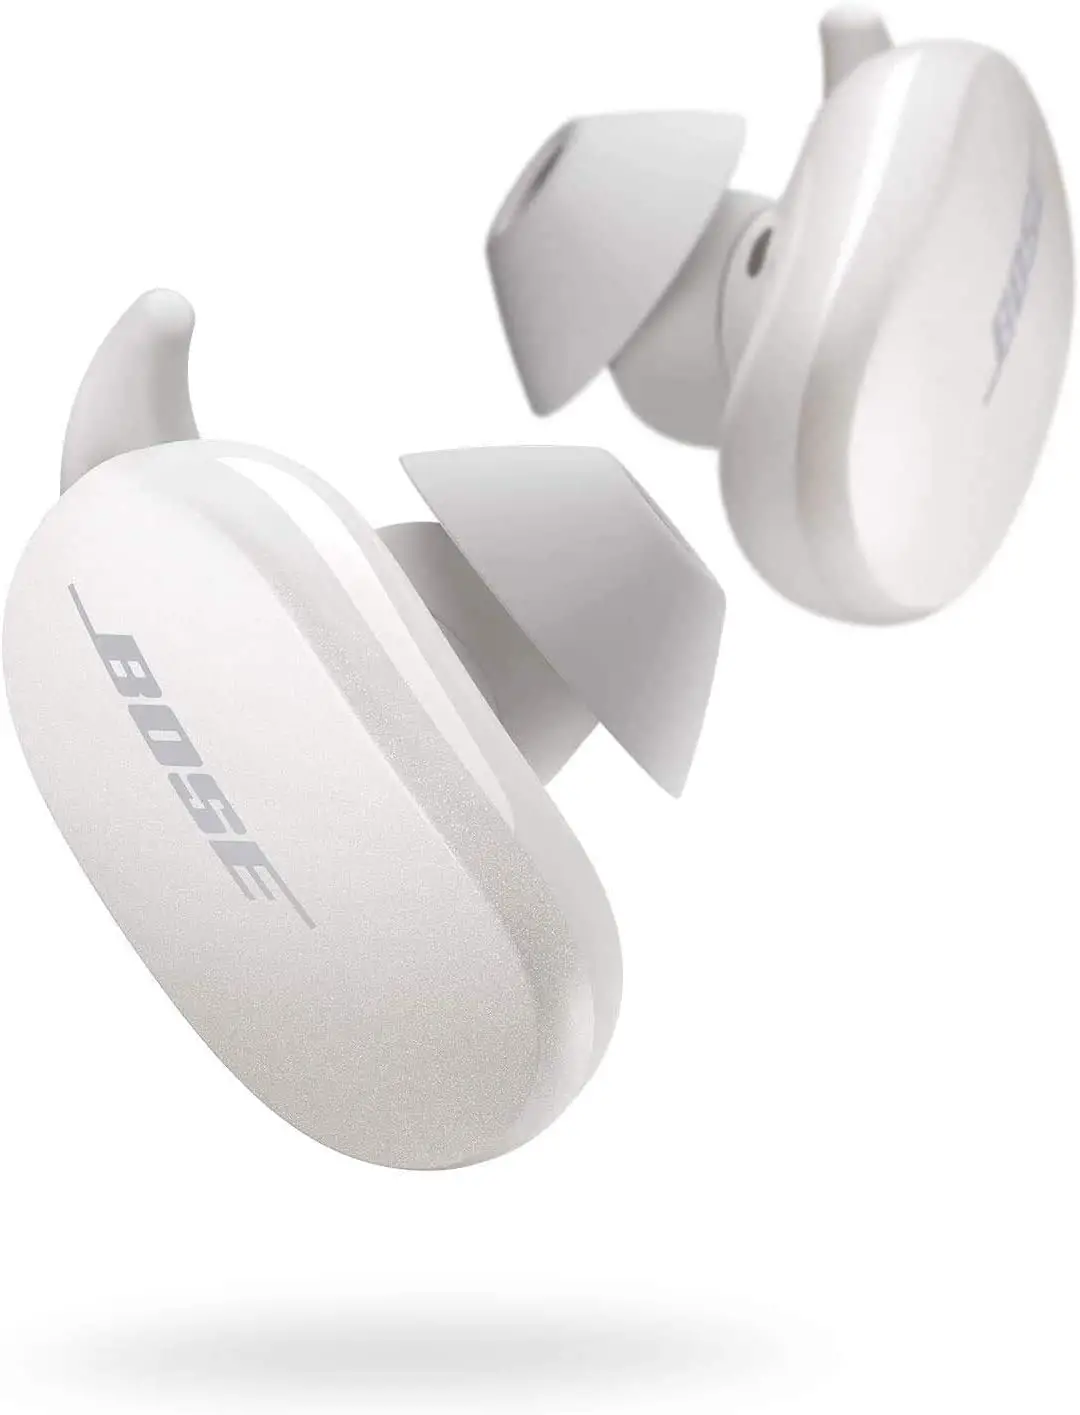 Bose QuietComfort Noise Cancelling Earbuds True Wireless Earphones with Voice Control White